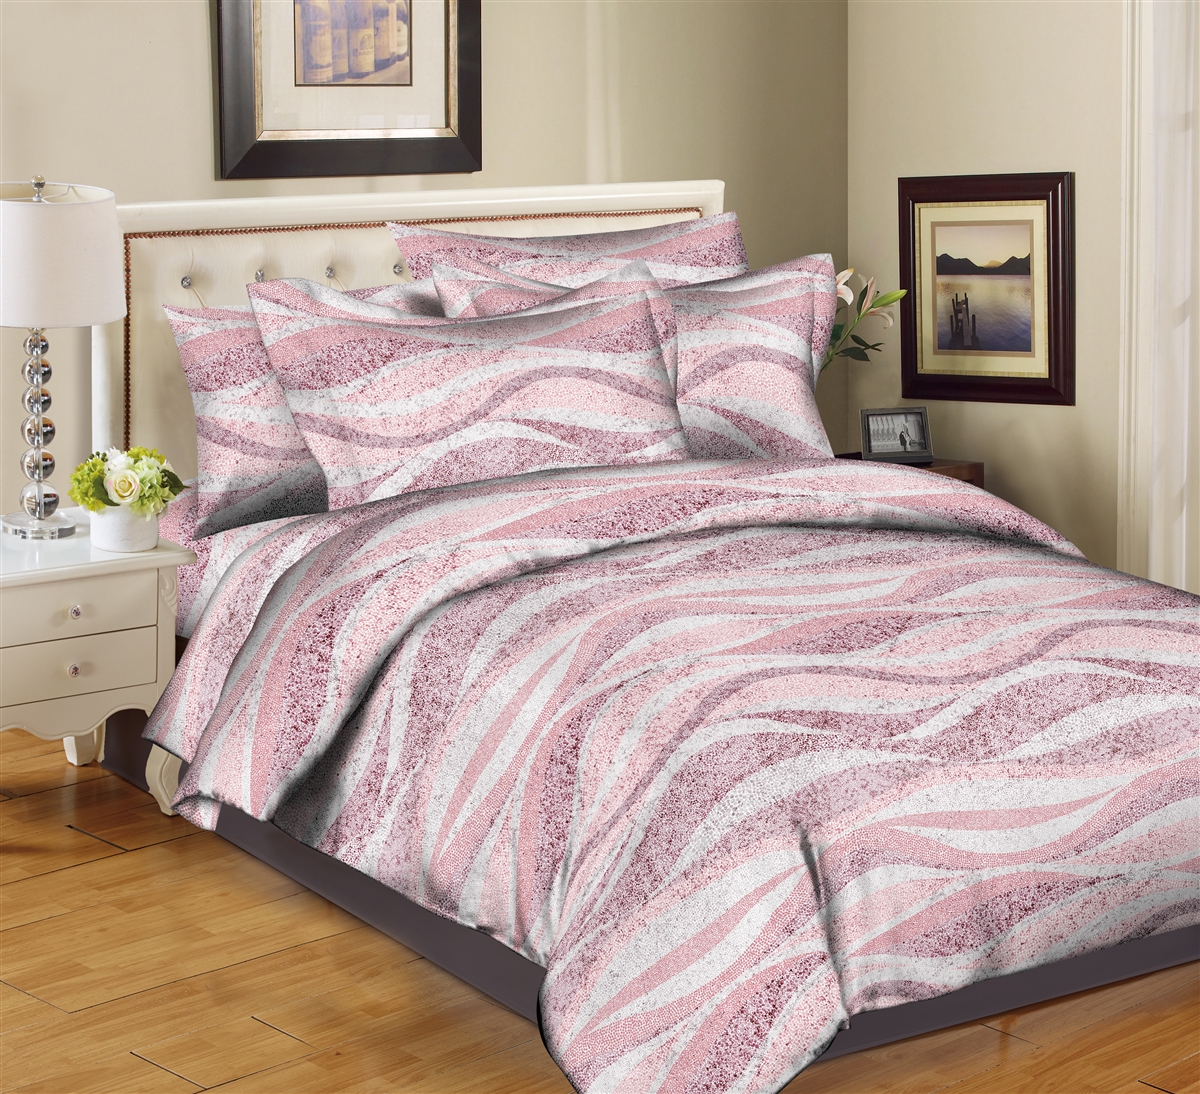 Better Bed Collection: Sandy Waves- Pink 8PC Twin Bedding Set